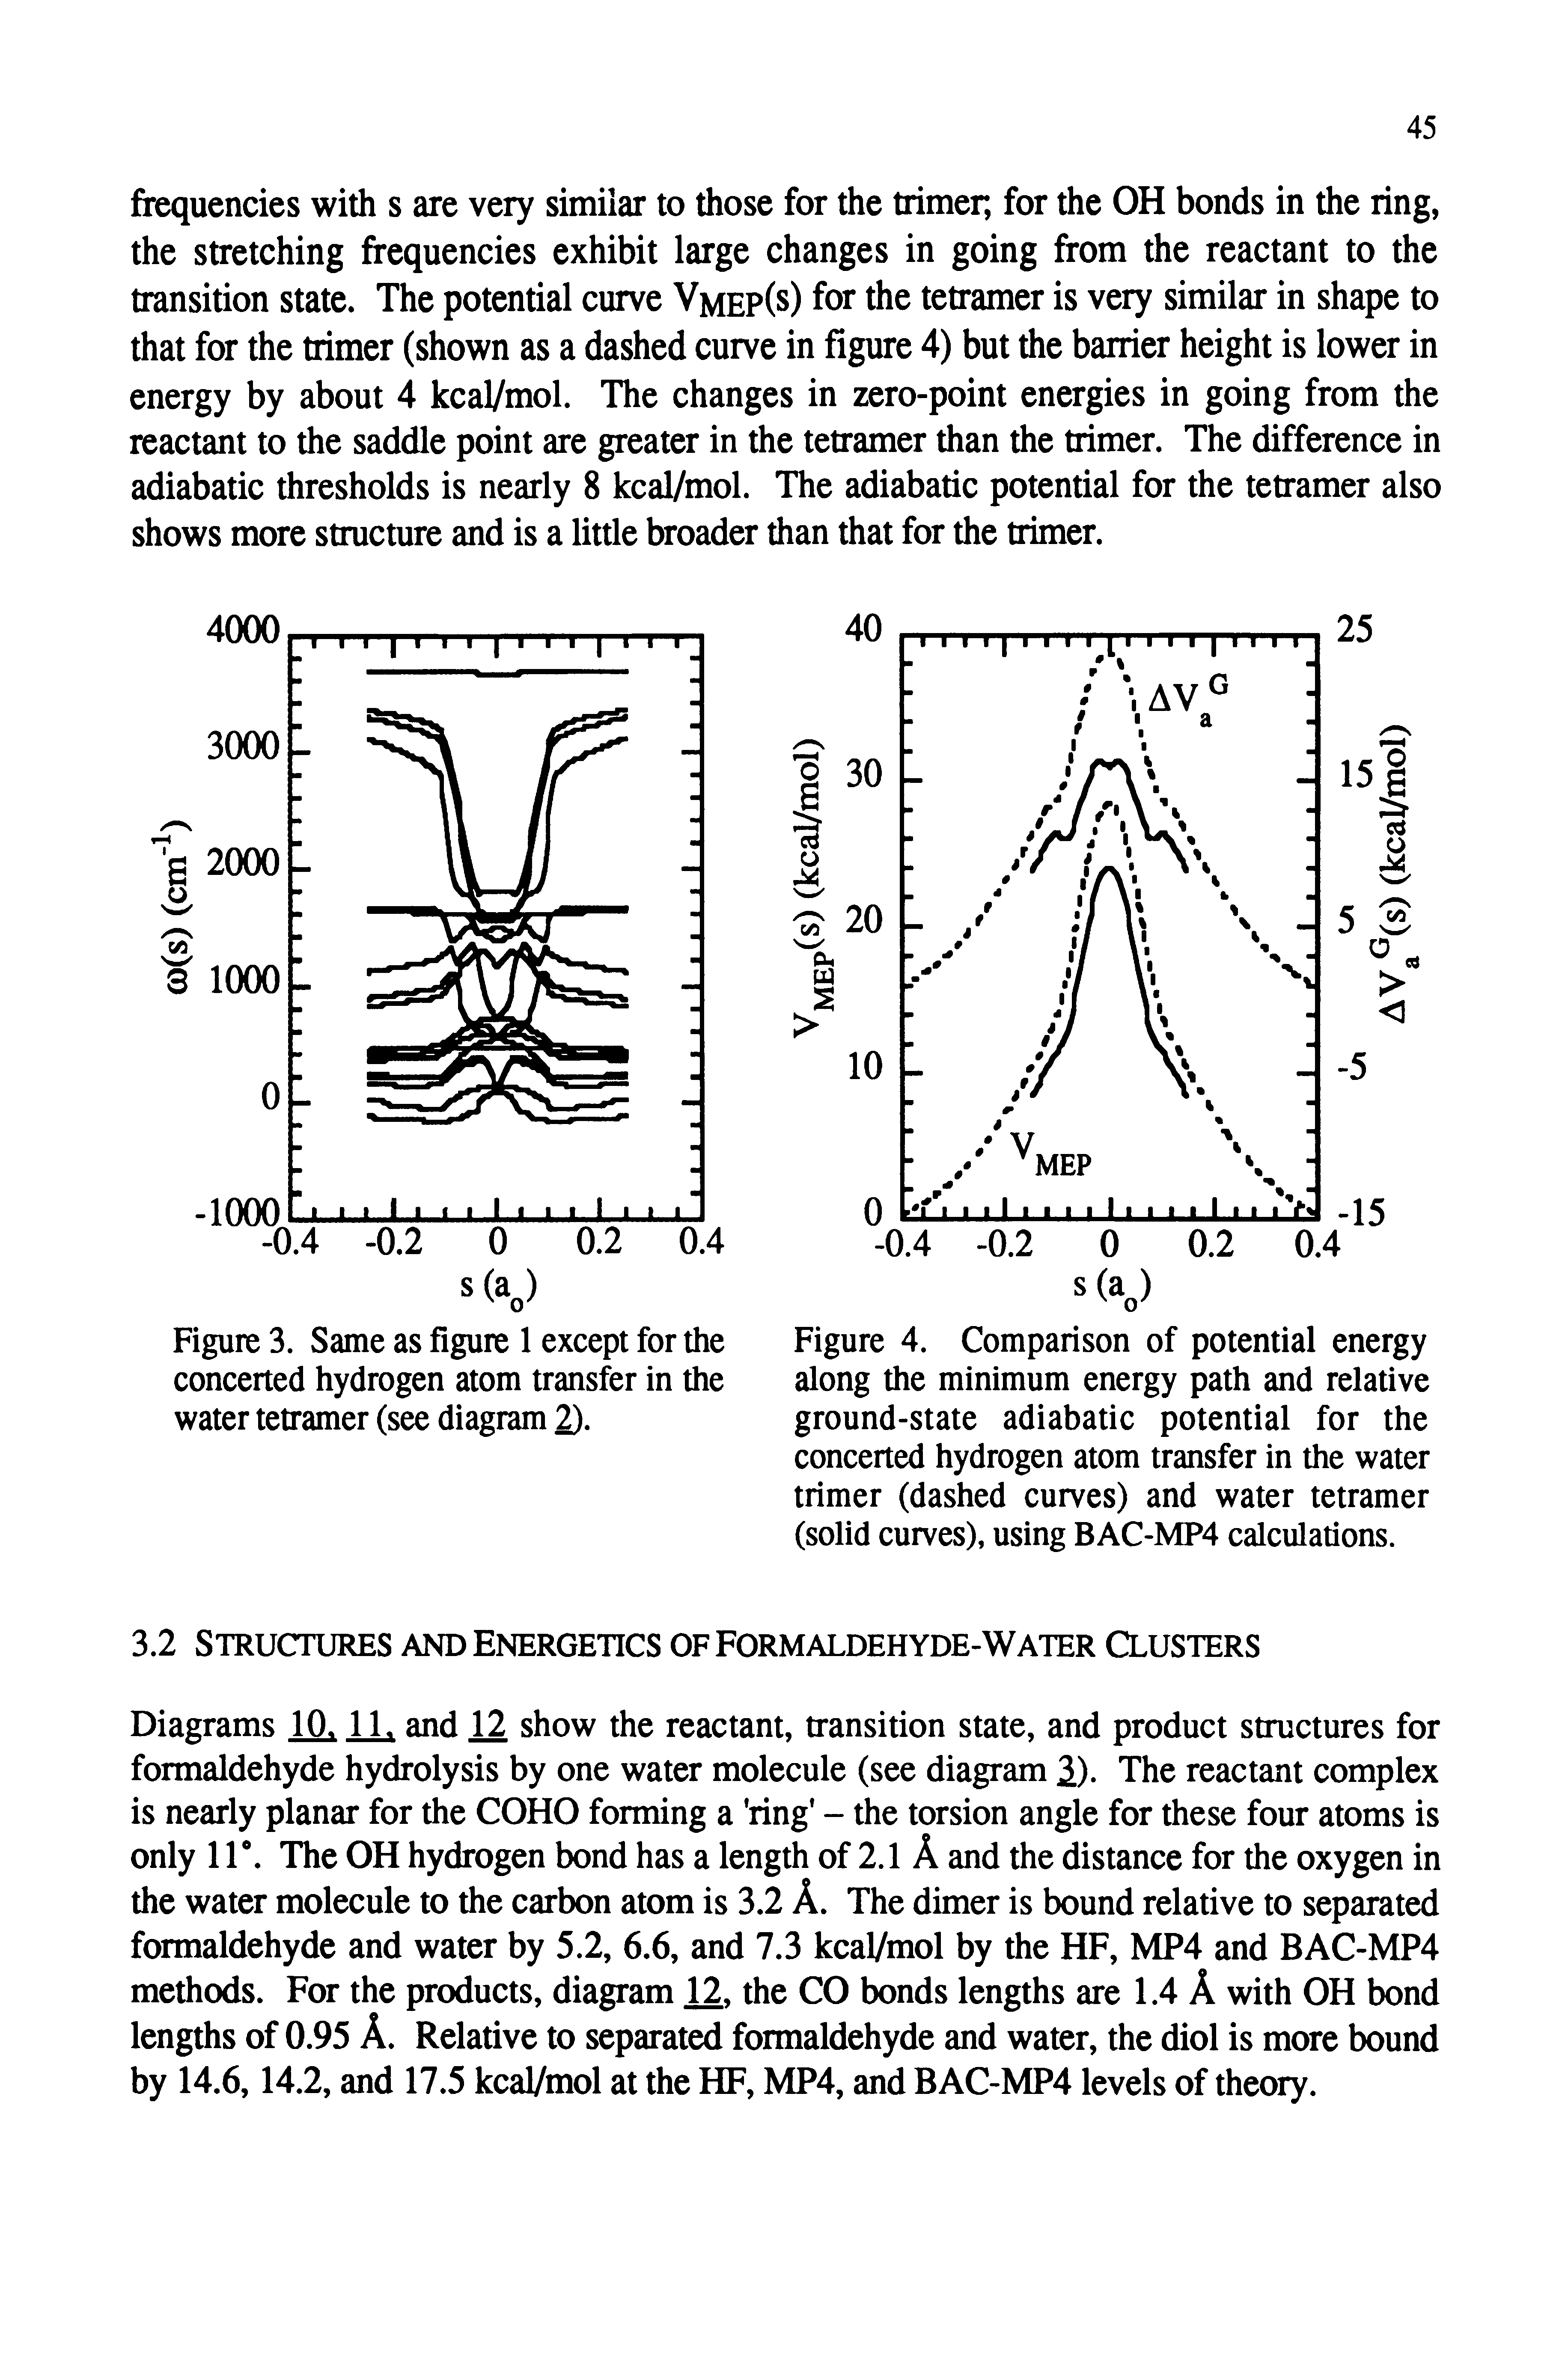 Figure 4. Comparison of potential energy along the minimum energy path and relative ground-state adiabatic potential for the concerted hydrogen atom transfer in the water trimer (dashed curves) and water tetramer (solid curves), using BAC-MP4 calculations.